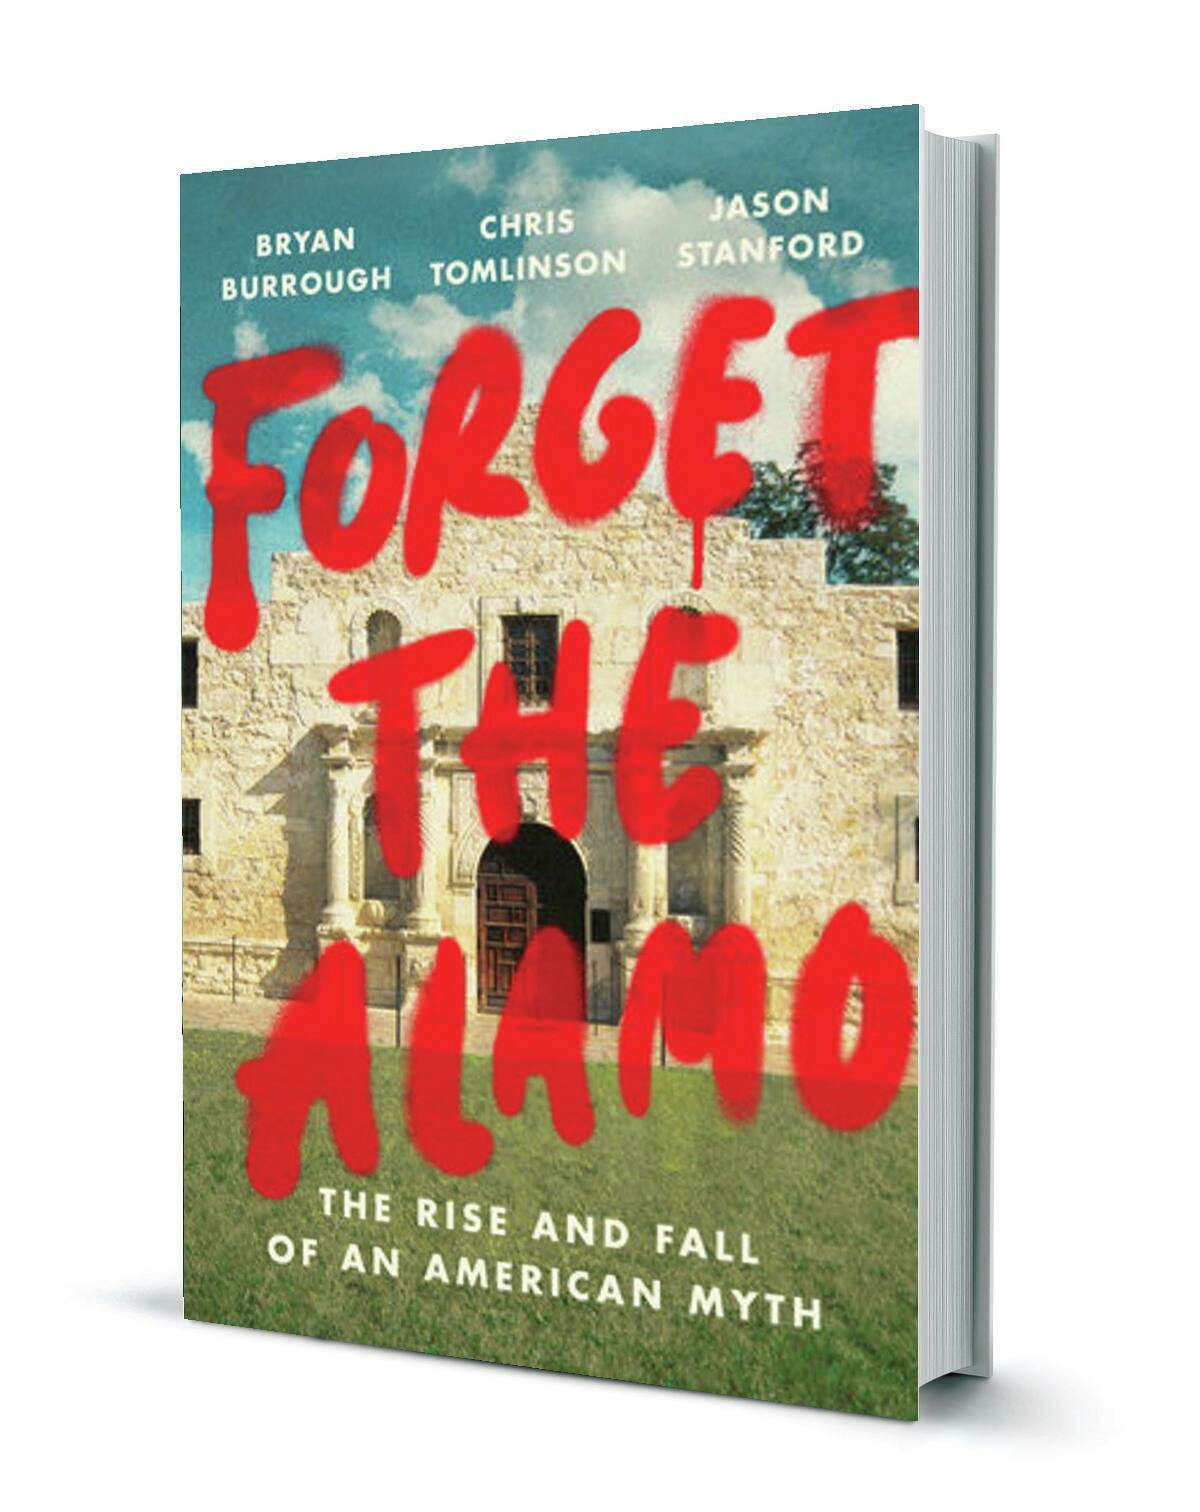 “Forget the Alamo: The Rise and Fall of an American Myth,” was released in June by Penguin Press.